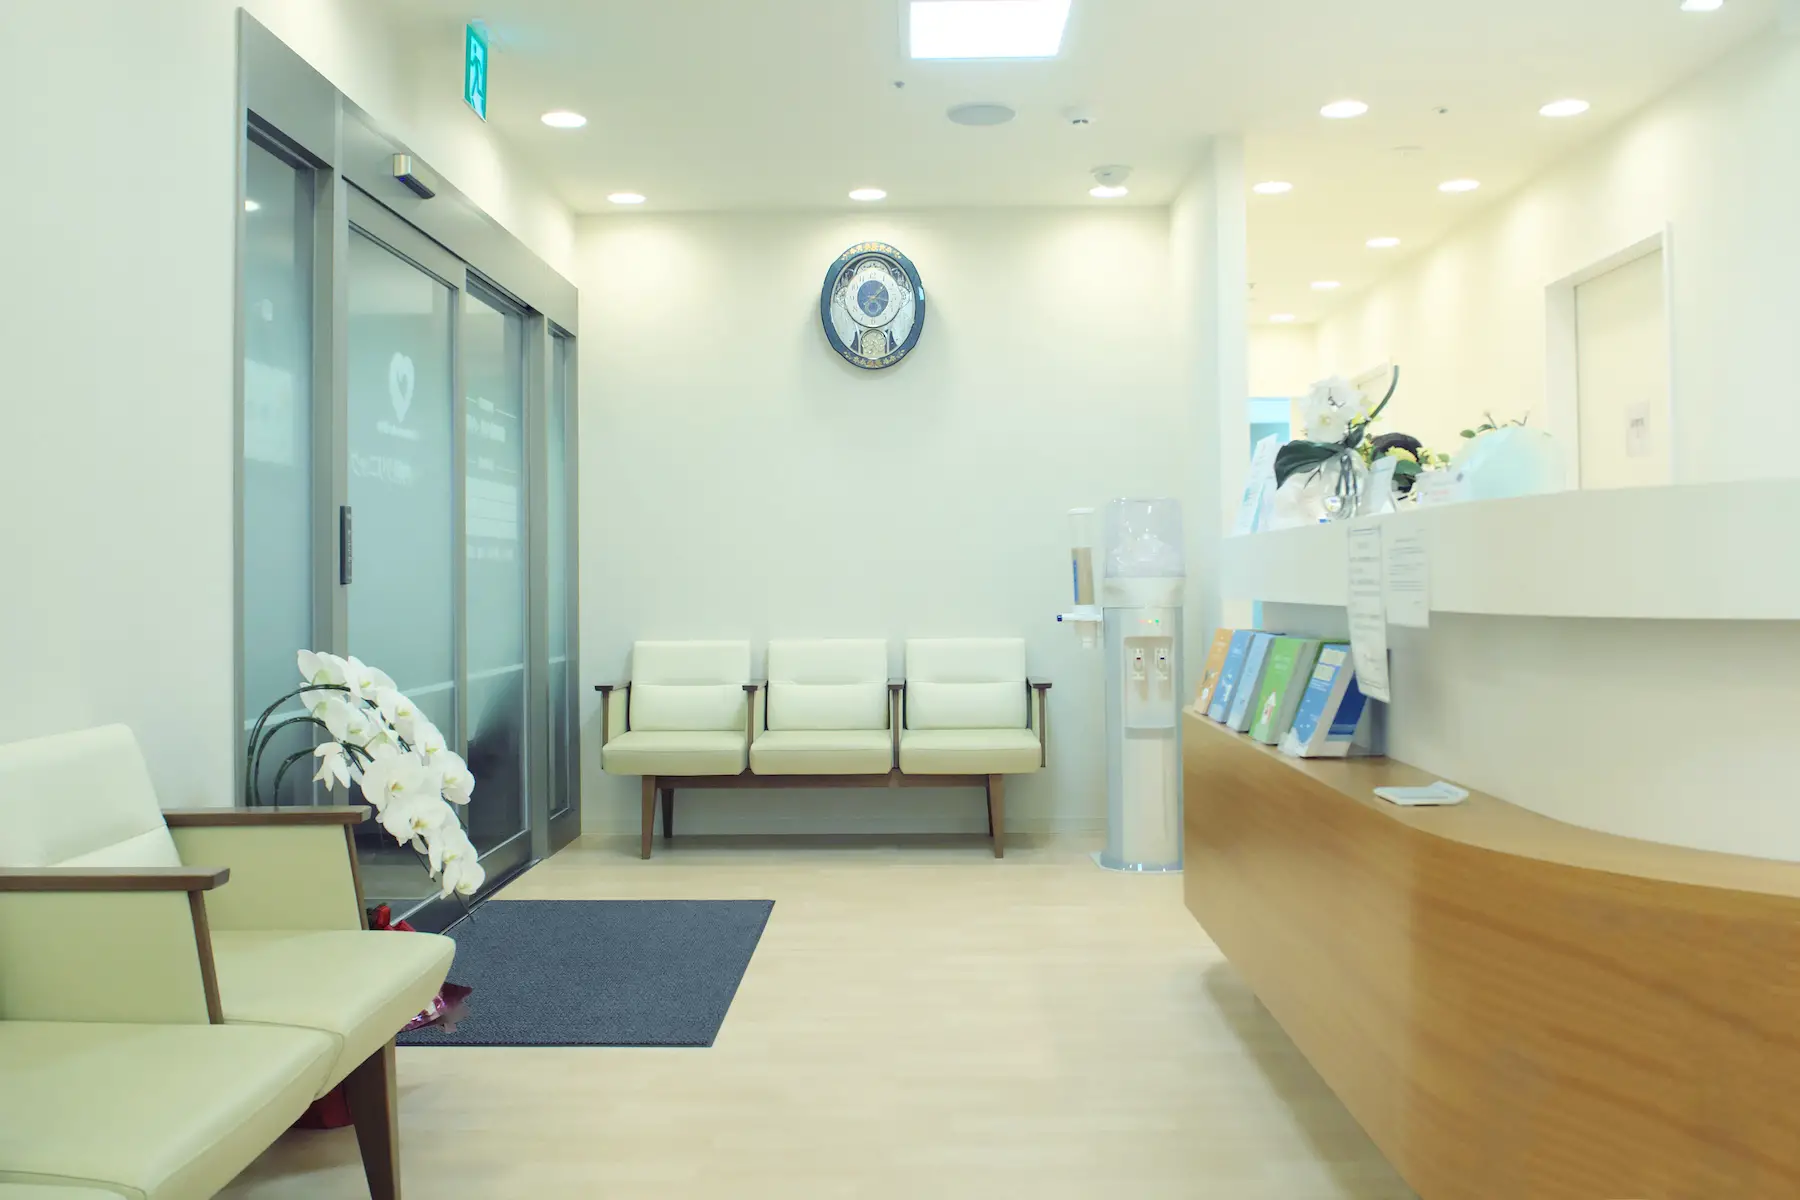 An empty doctor's office waiting room in Japan, with flowers, water cooler, and a reception desk